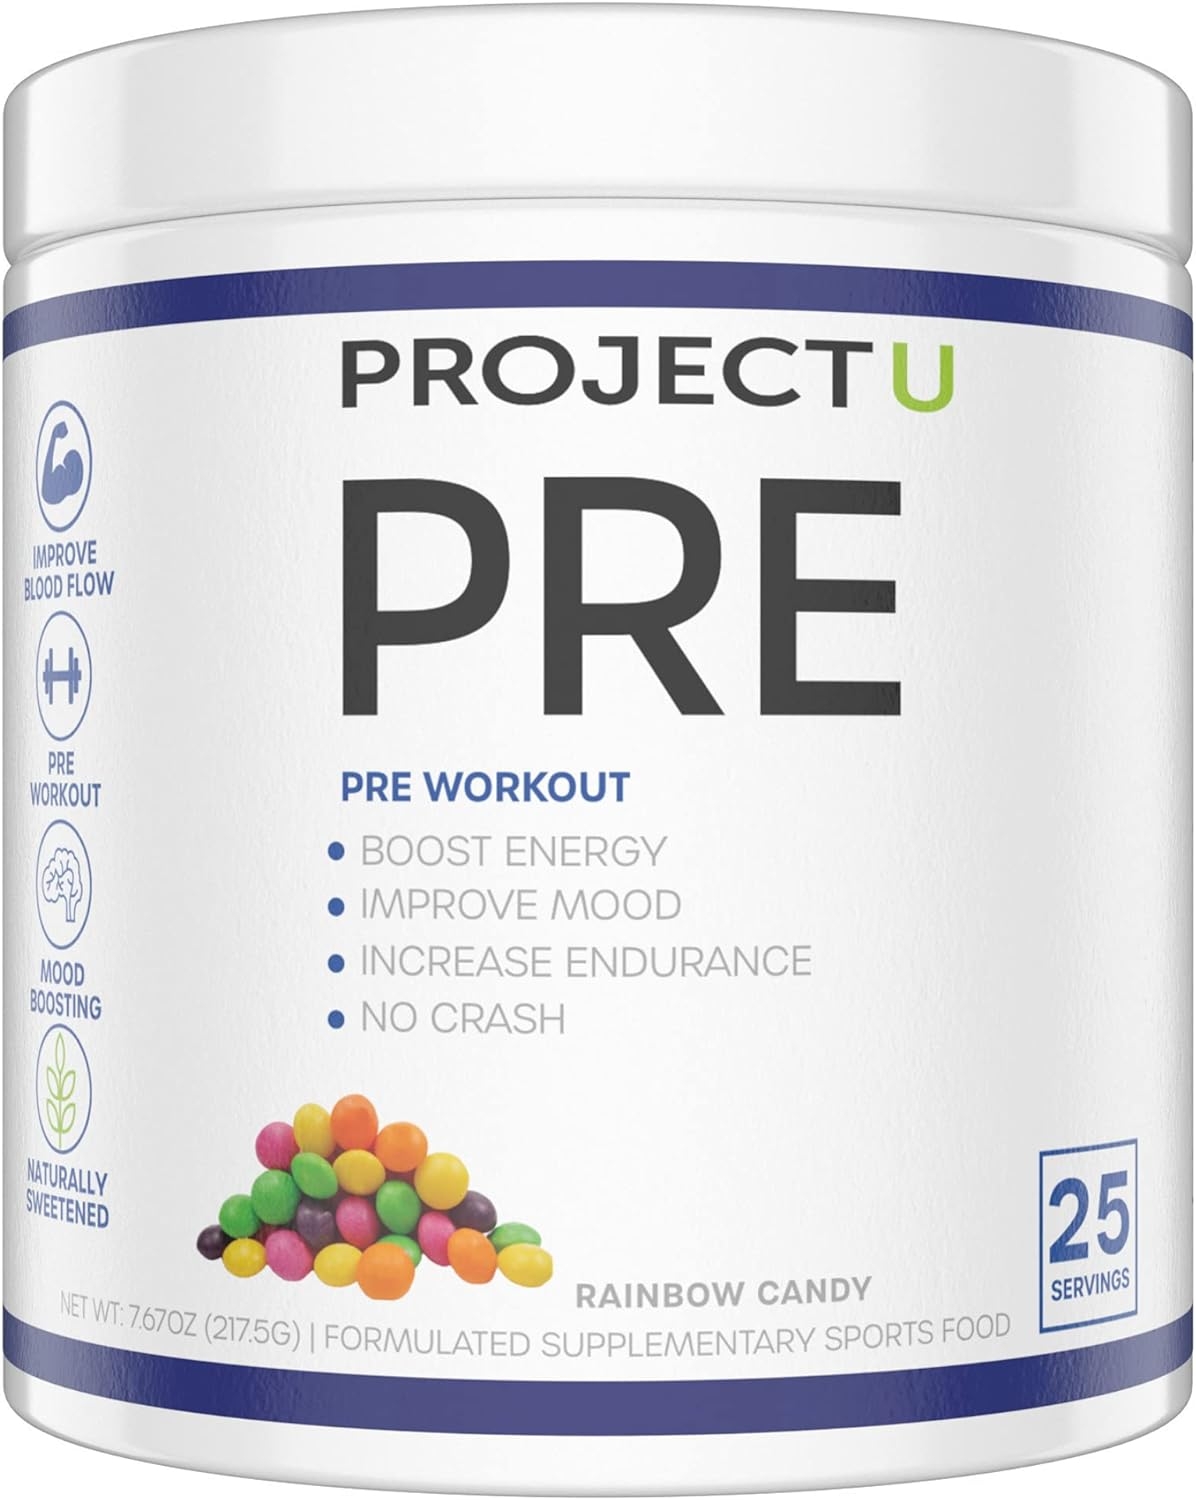 Project U PRE, Pre Workout 100% Plant Based Pre Workout Supplement, Improve Muscle Endurance, Reduce Fatigue, and Stay Focused, Increase Nitric Oxide Production, Train Harder and Longer